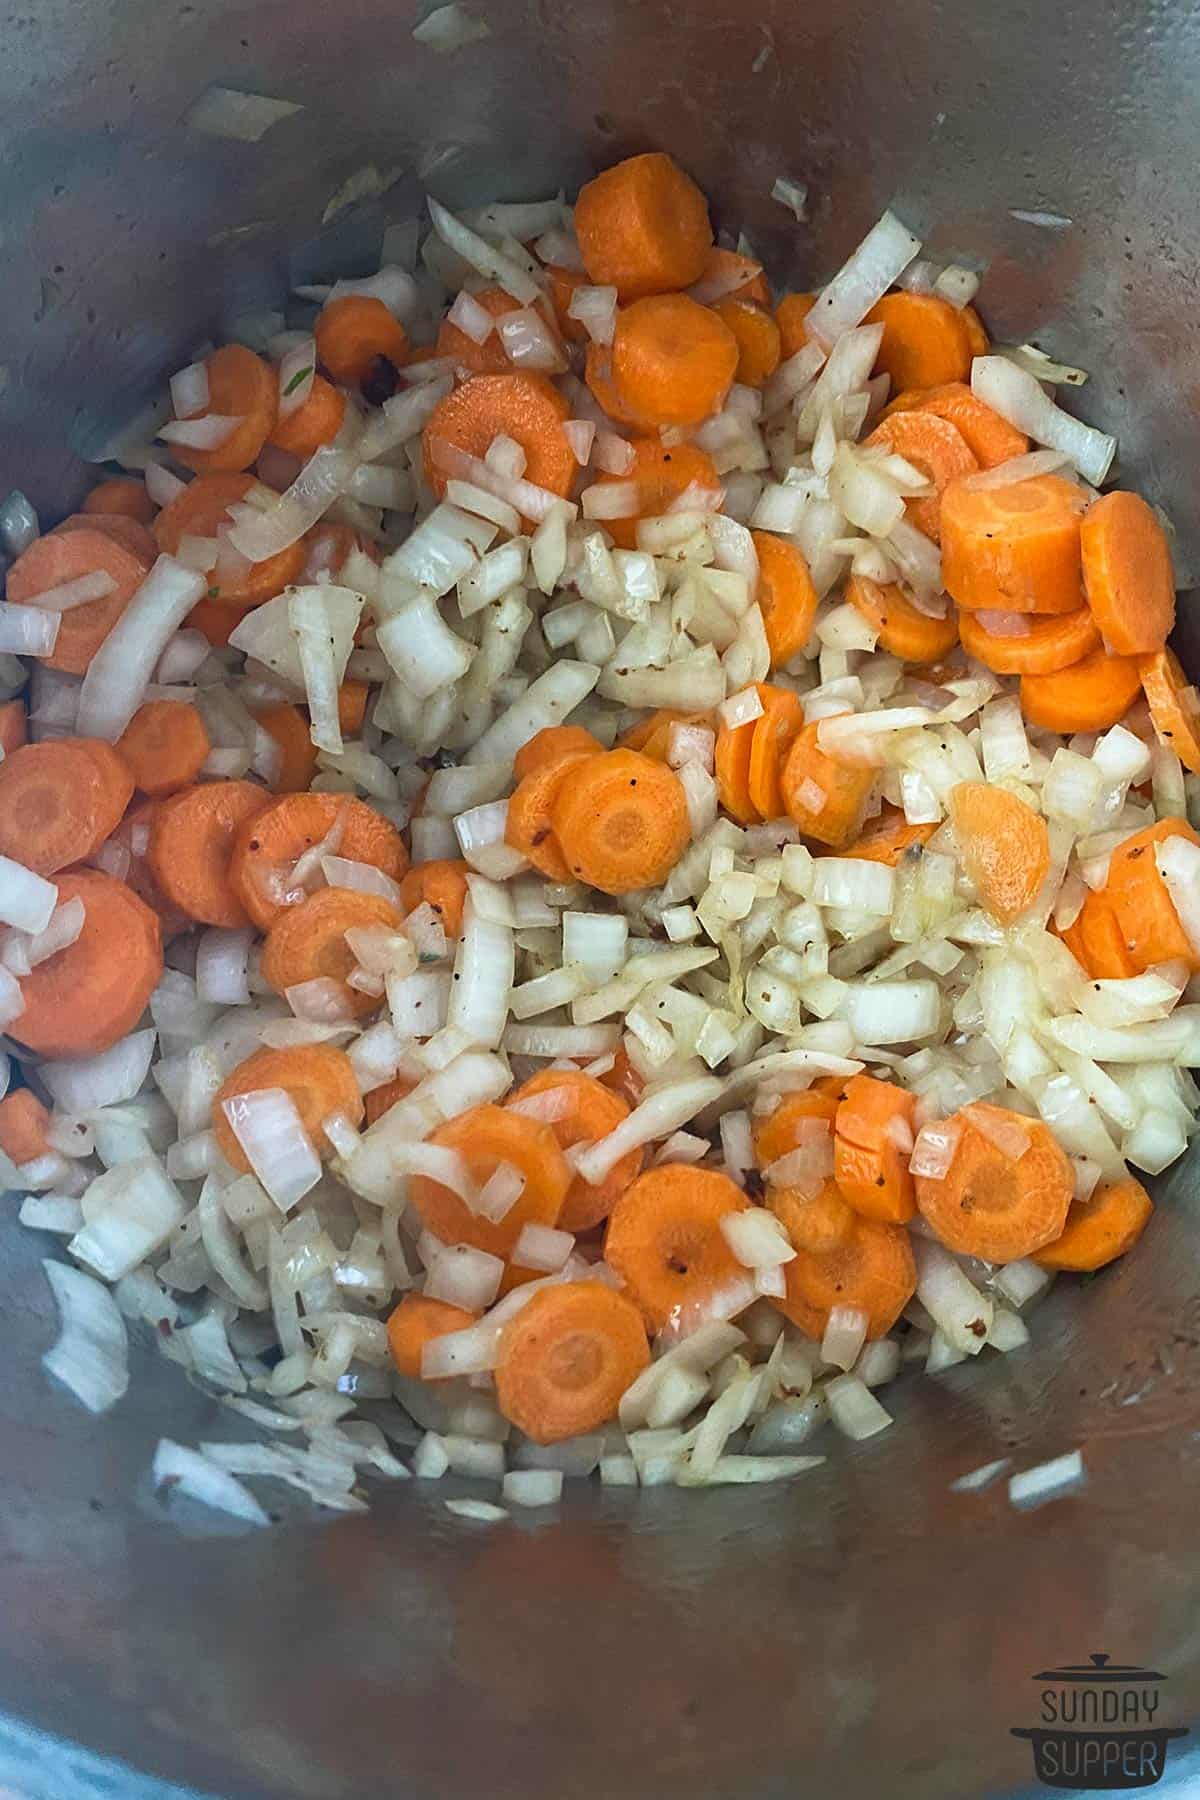 the onions and carrots added to the pot to saute